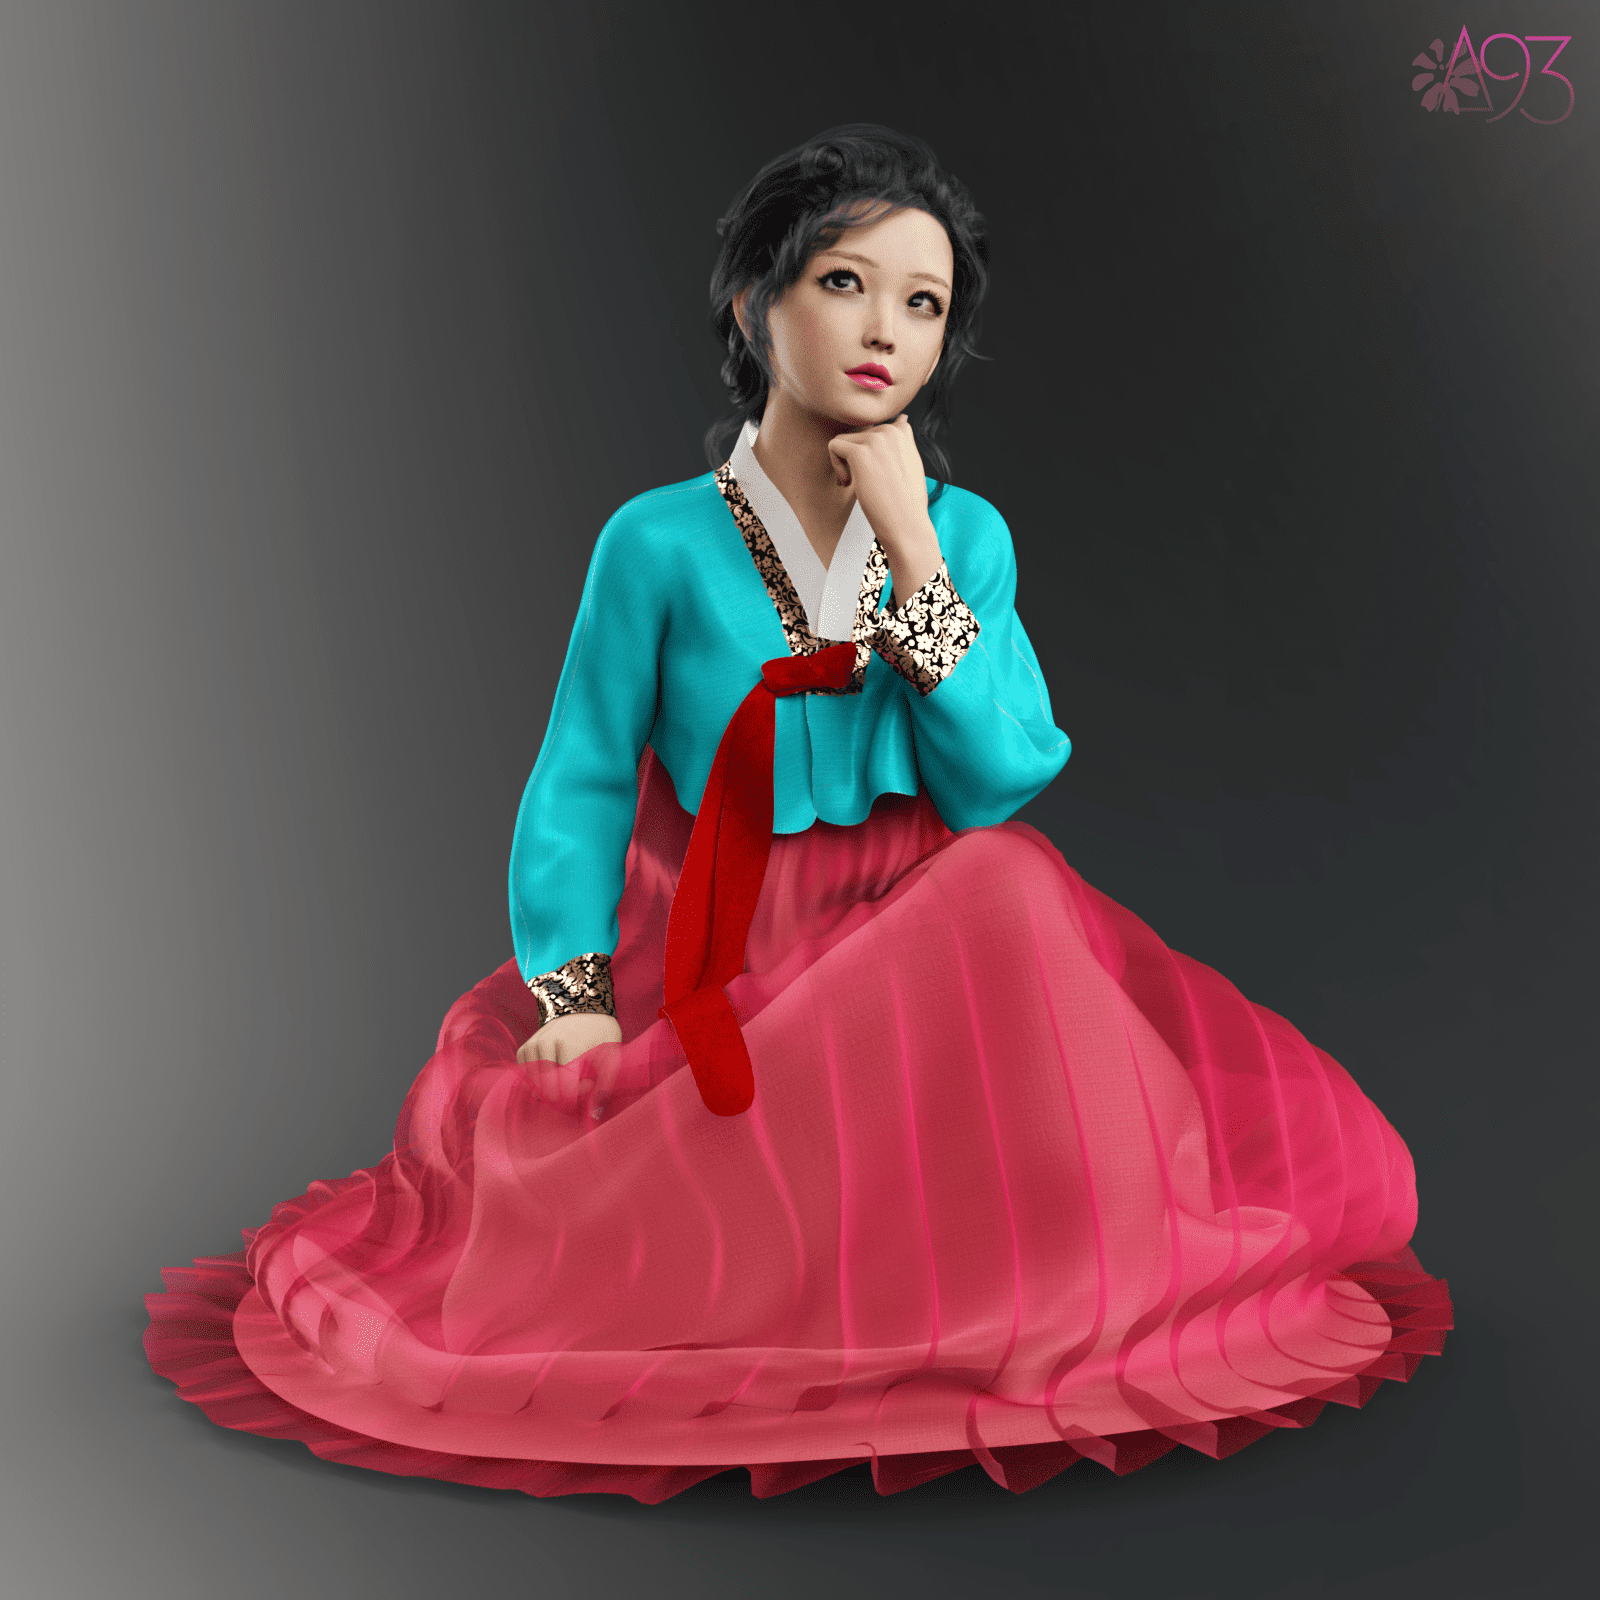 a93 – dForce Hanbok for G8F and G8.1F_DAZ3DDL